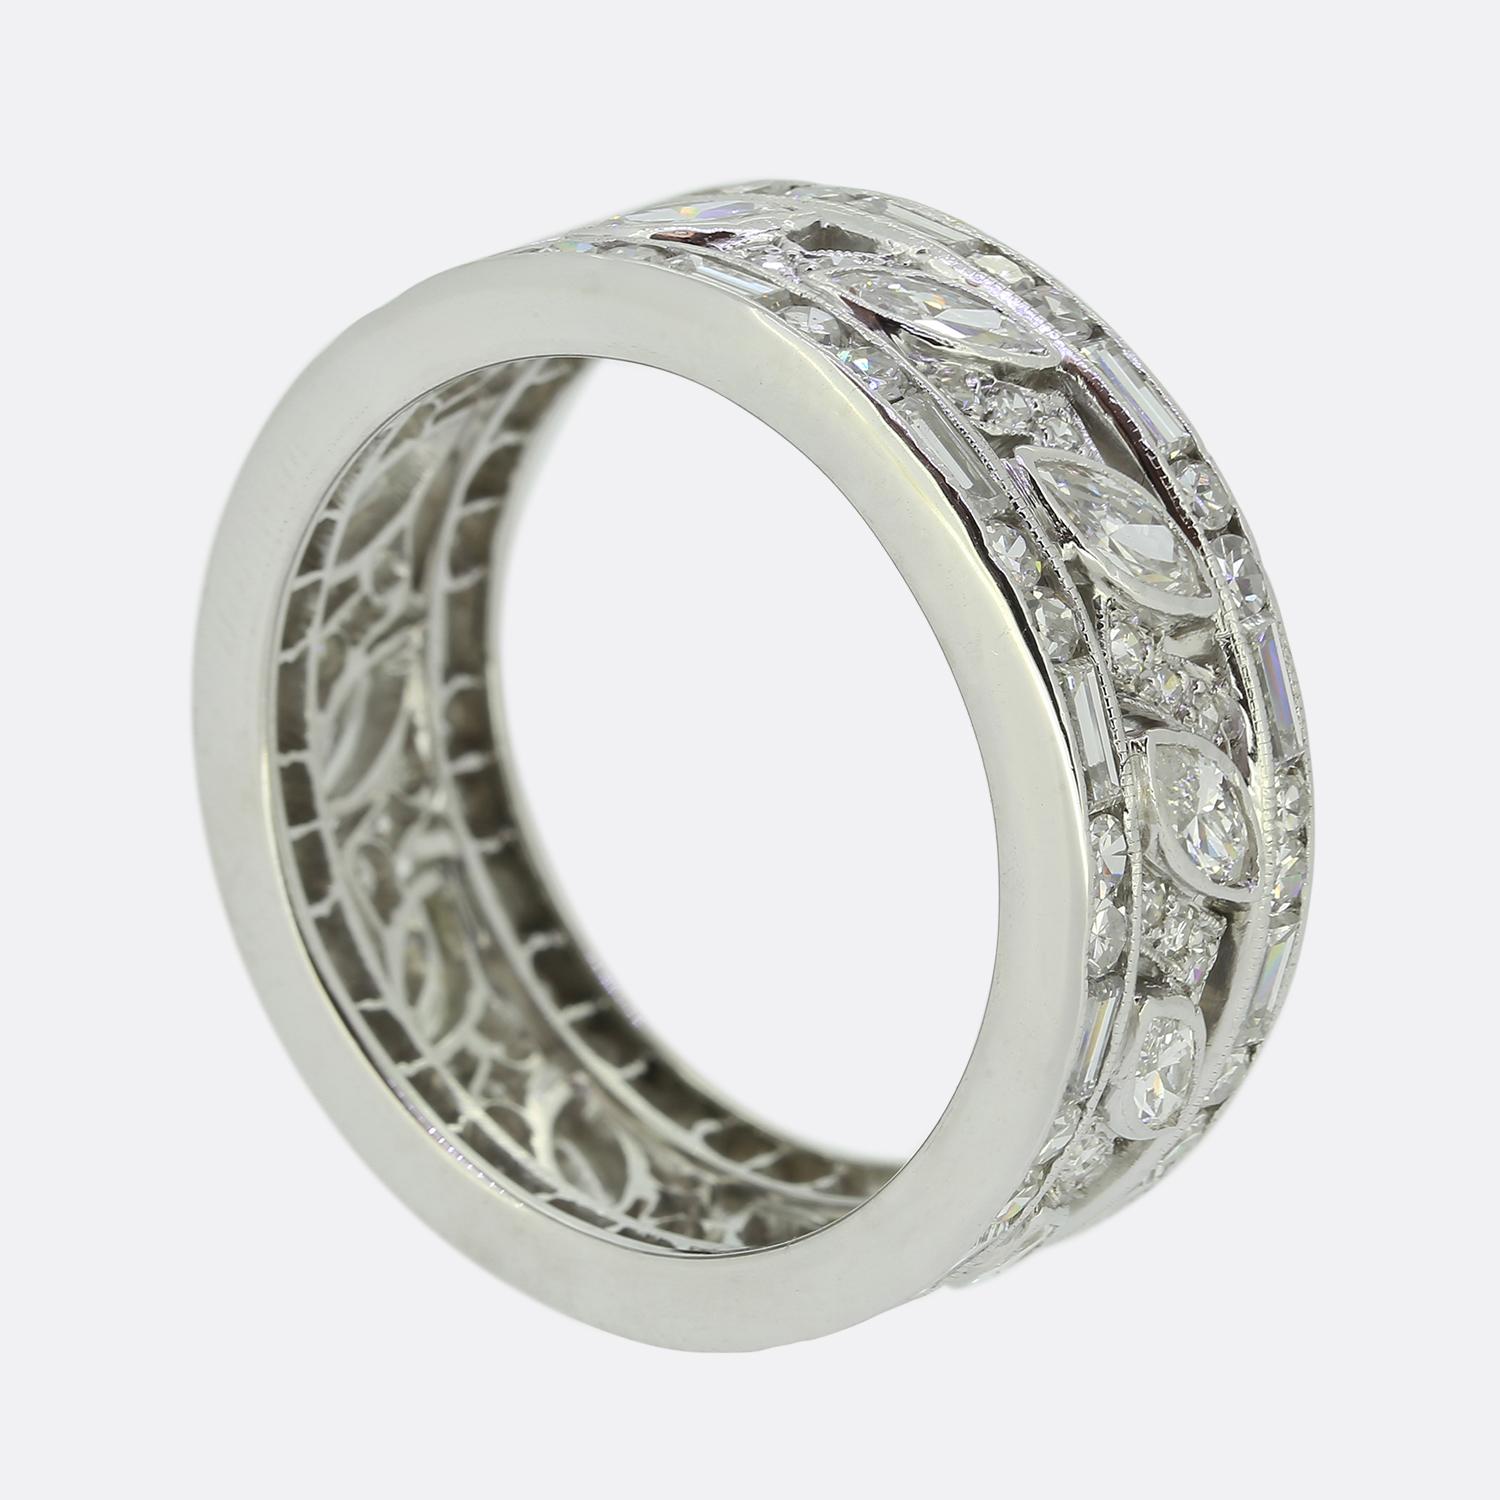 Here we have a wonderfully unique eternity ring taken from the pinnacle of the Art Deco movement. This elegant piece has been crafted from platinum and is set with an alternating array of marquise and eight cut diamonds at the centre. This open